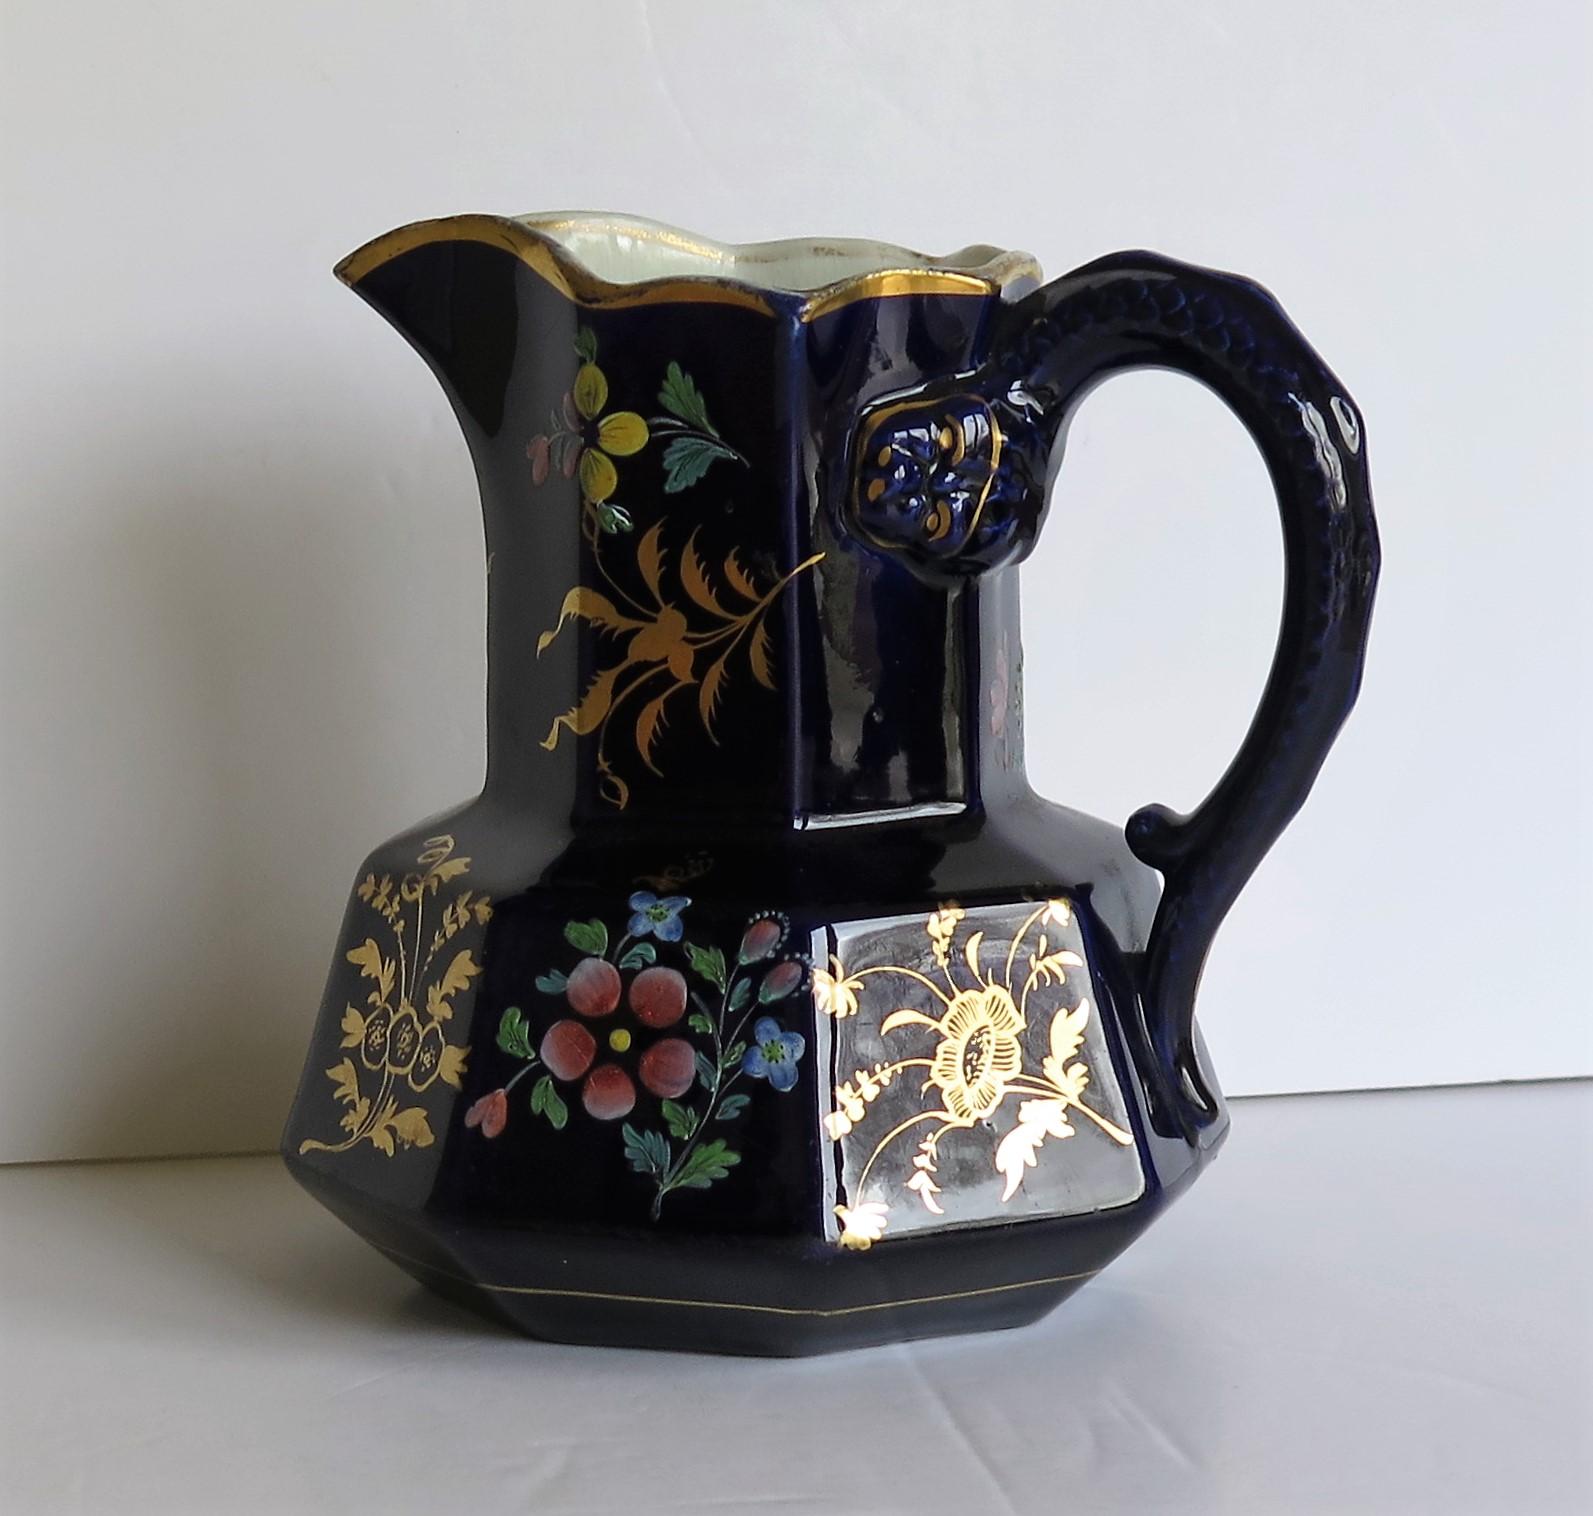 Hand-Painted Rare Early 19th Century Ironstone Jug or Pitcher, Zachariah Boyle Hand Enamelled